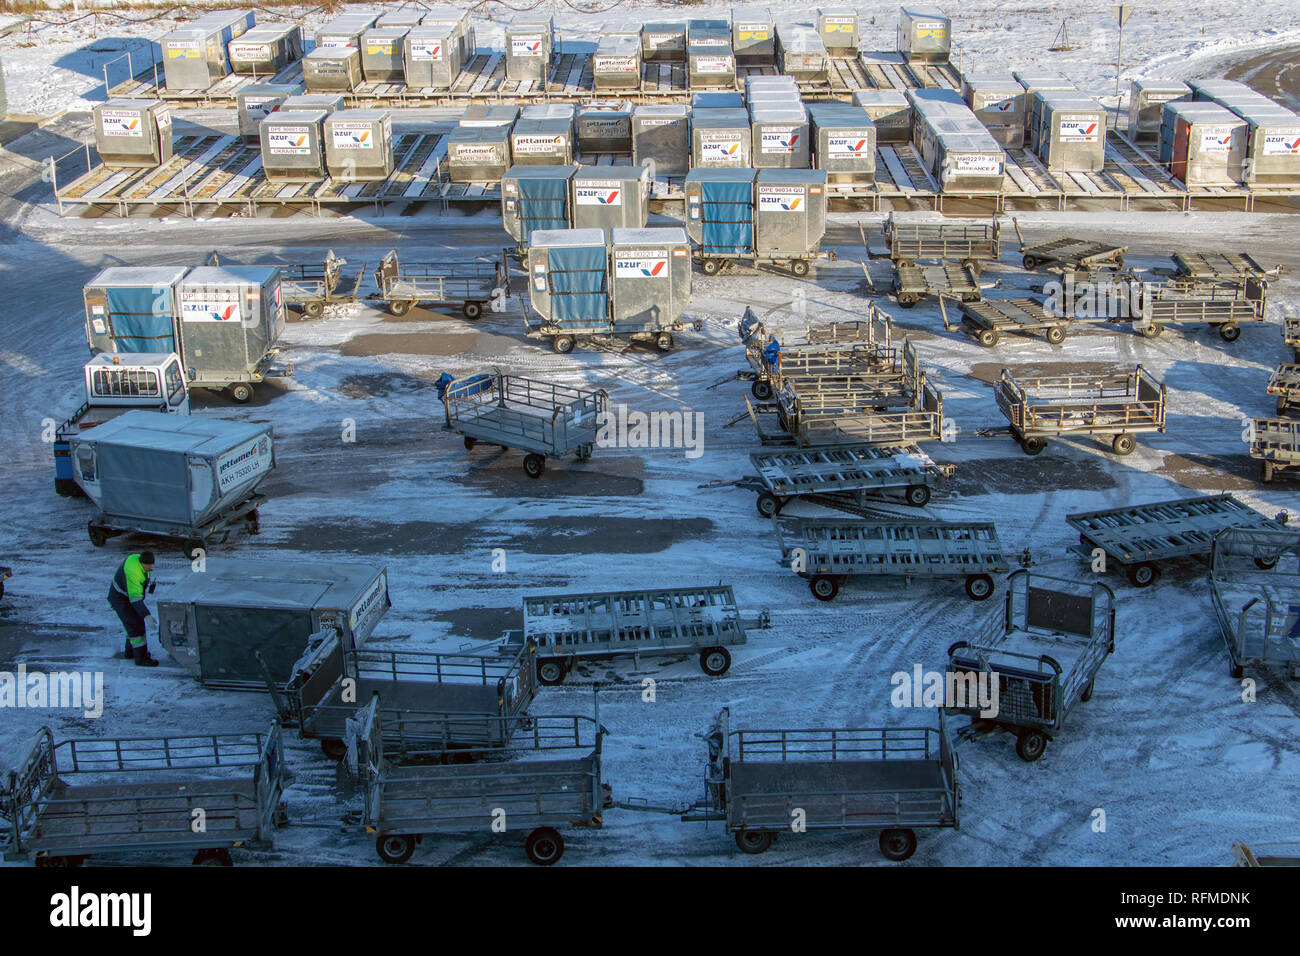 KIEV, UKRAINE, NOV 28 2018, Containers with trolleys in the storage area at the winter airport. Stock Photo